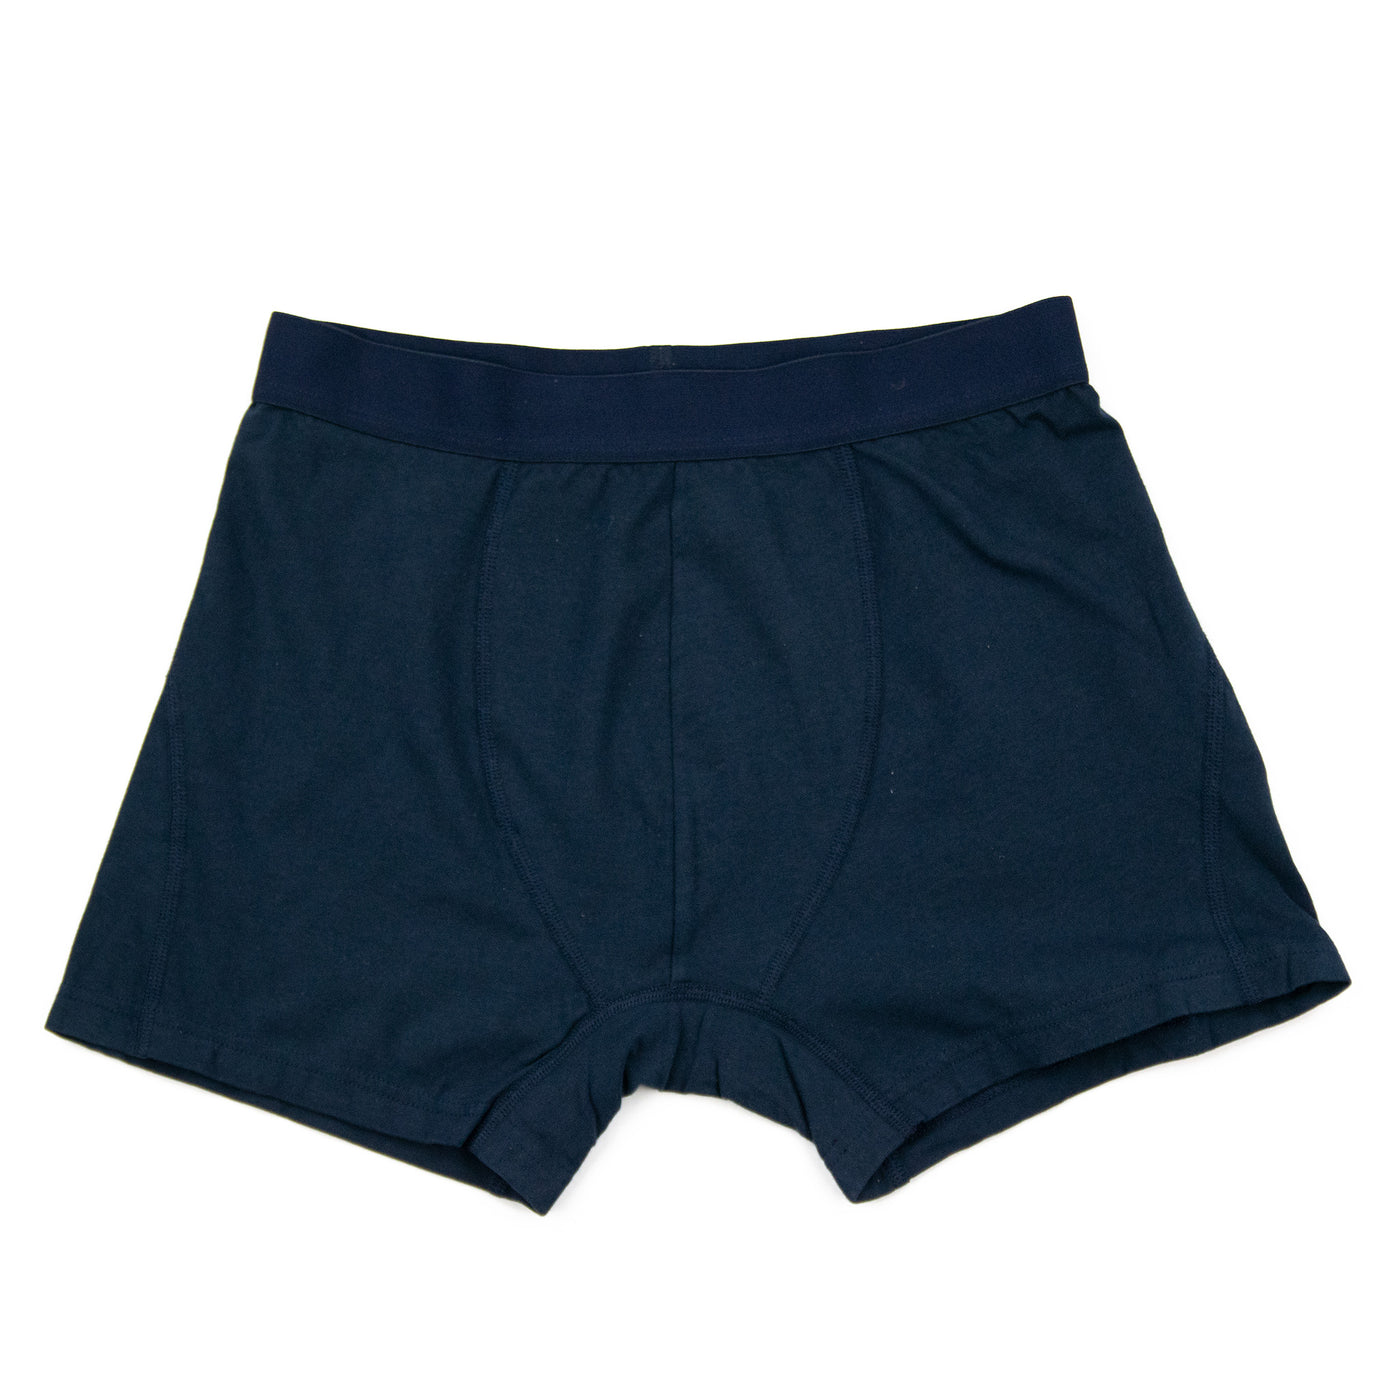 Colorful Standard Organic Cotton Boxer Shorts Navy Blue FRONT